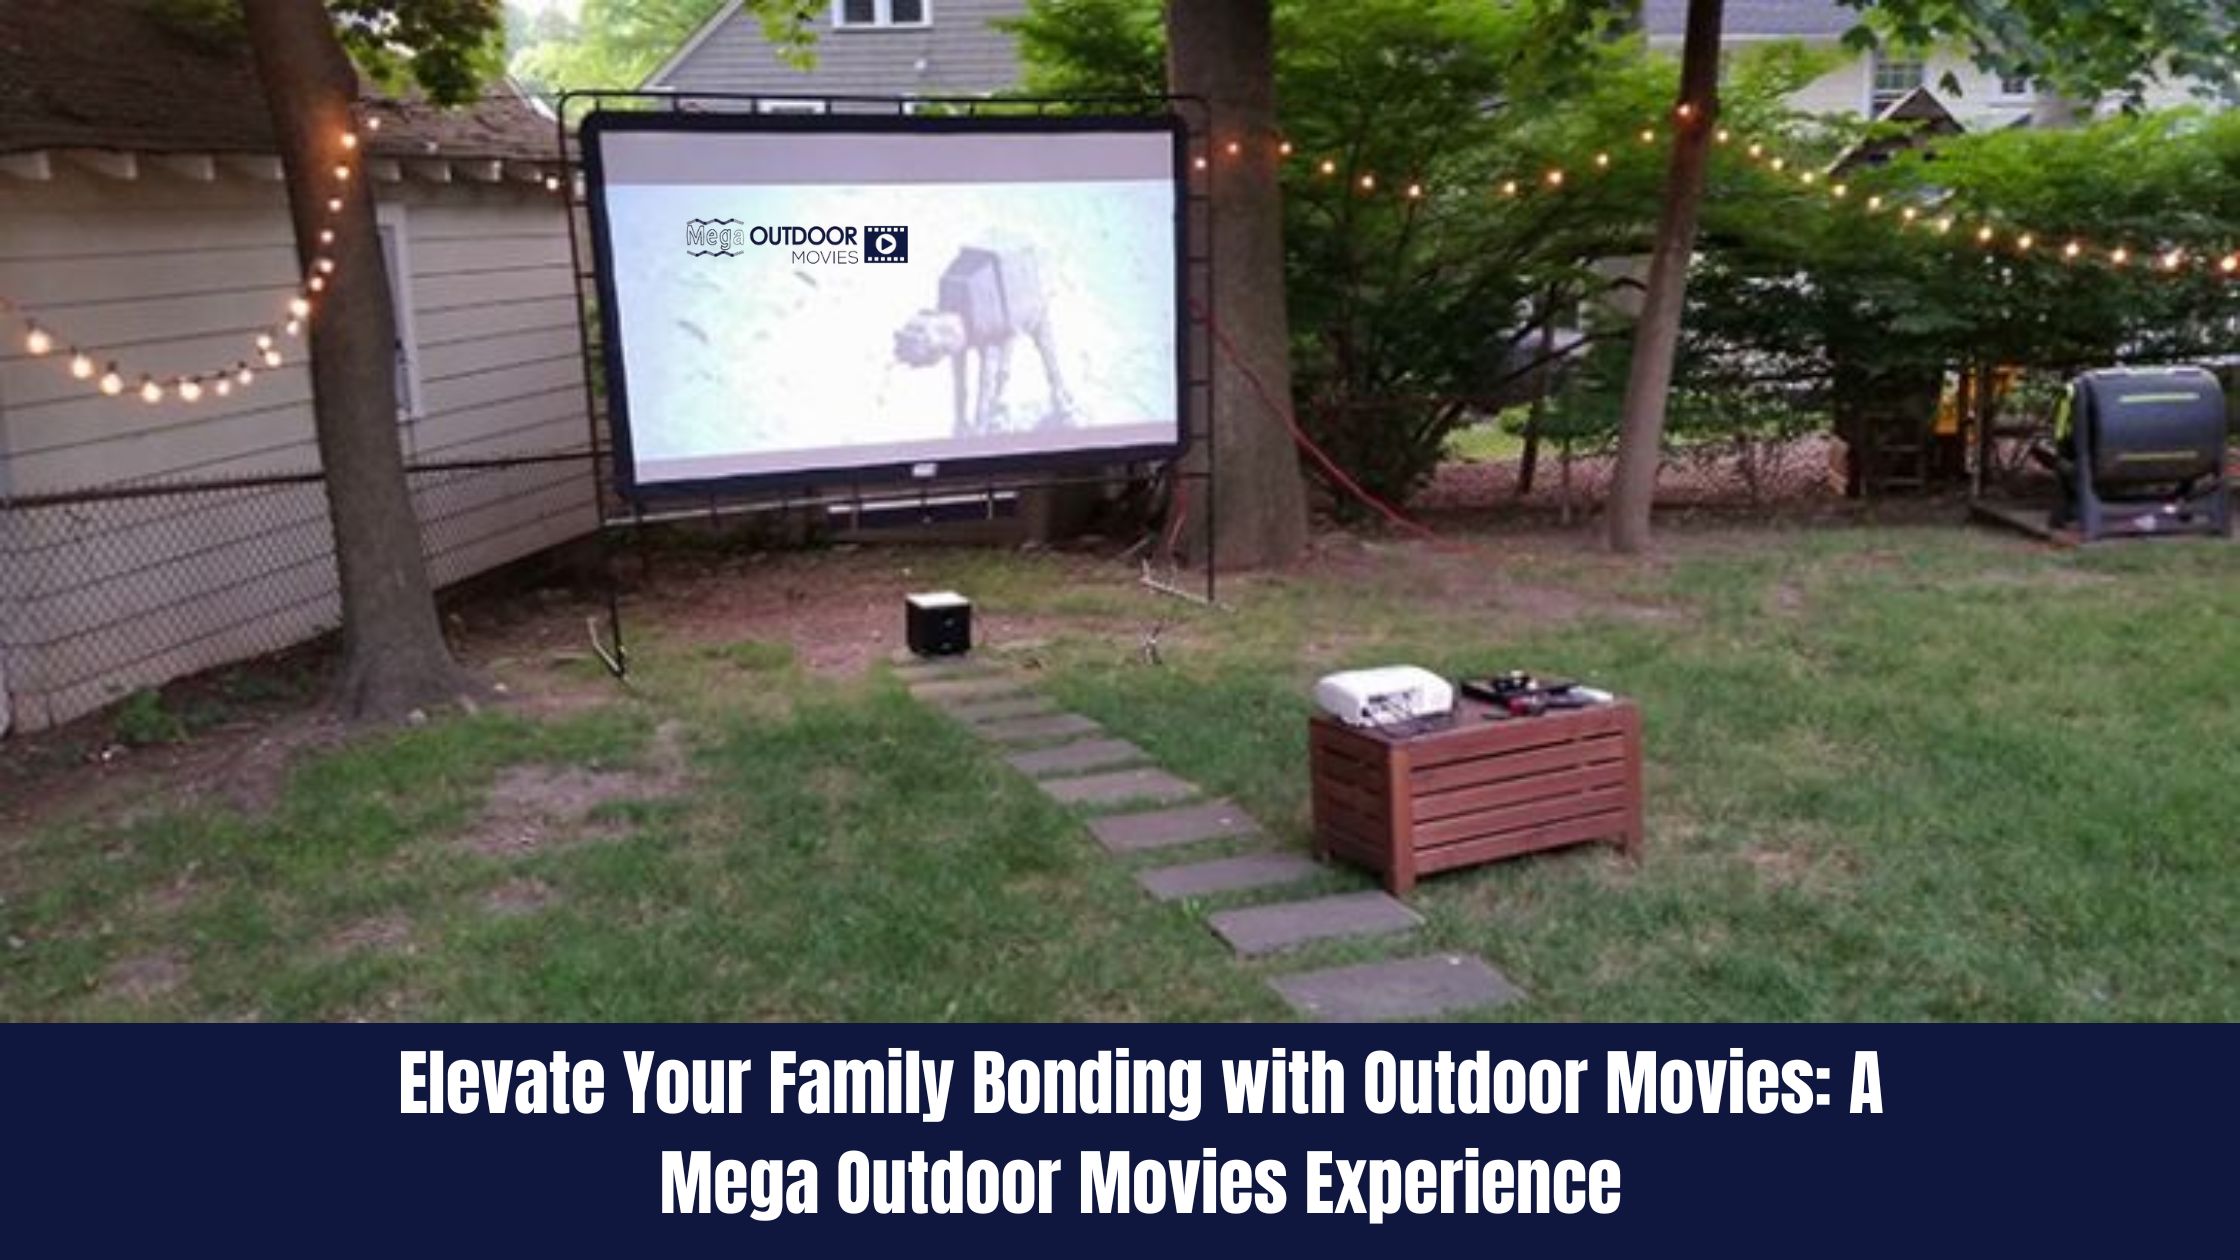 Elevate Your Family Bonding with Outdoor Movies: A Mega Outdoor Movies Experience